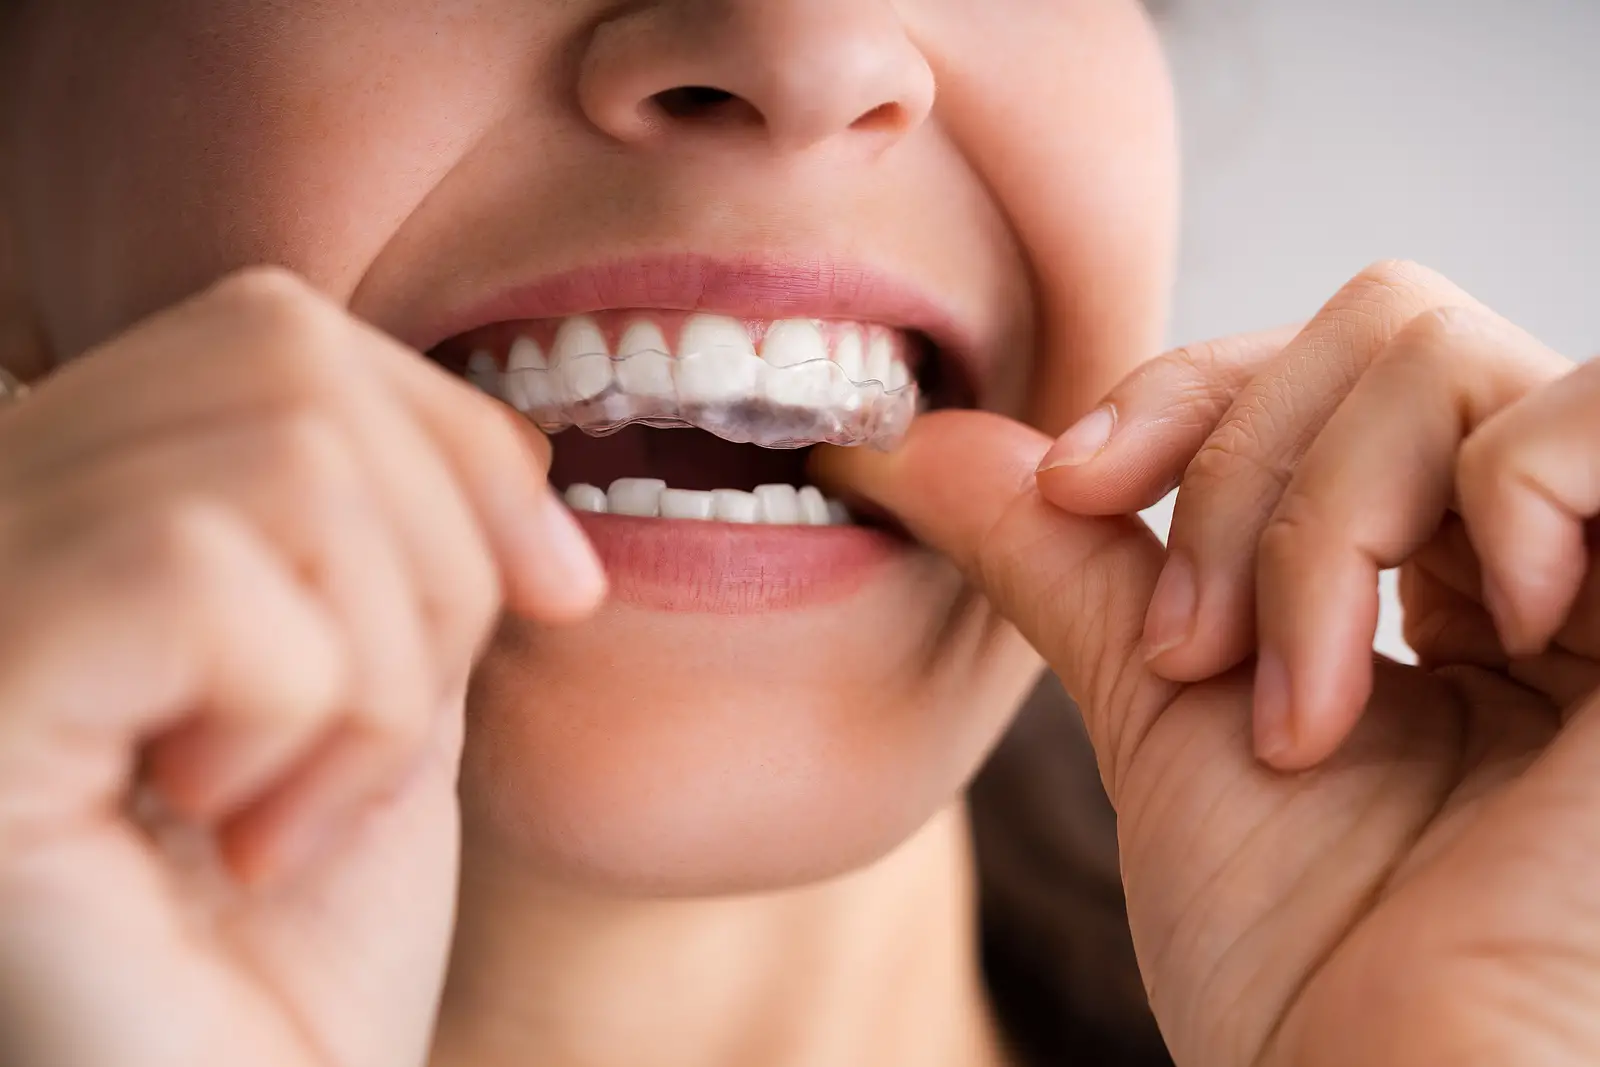 Common Dental Problems That Invisalign Can Fix